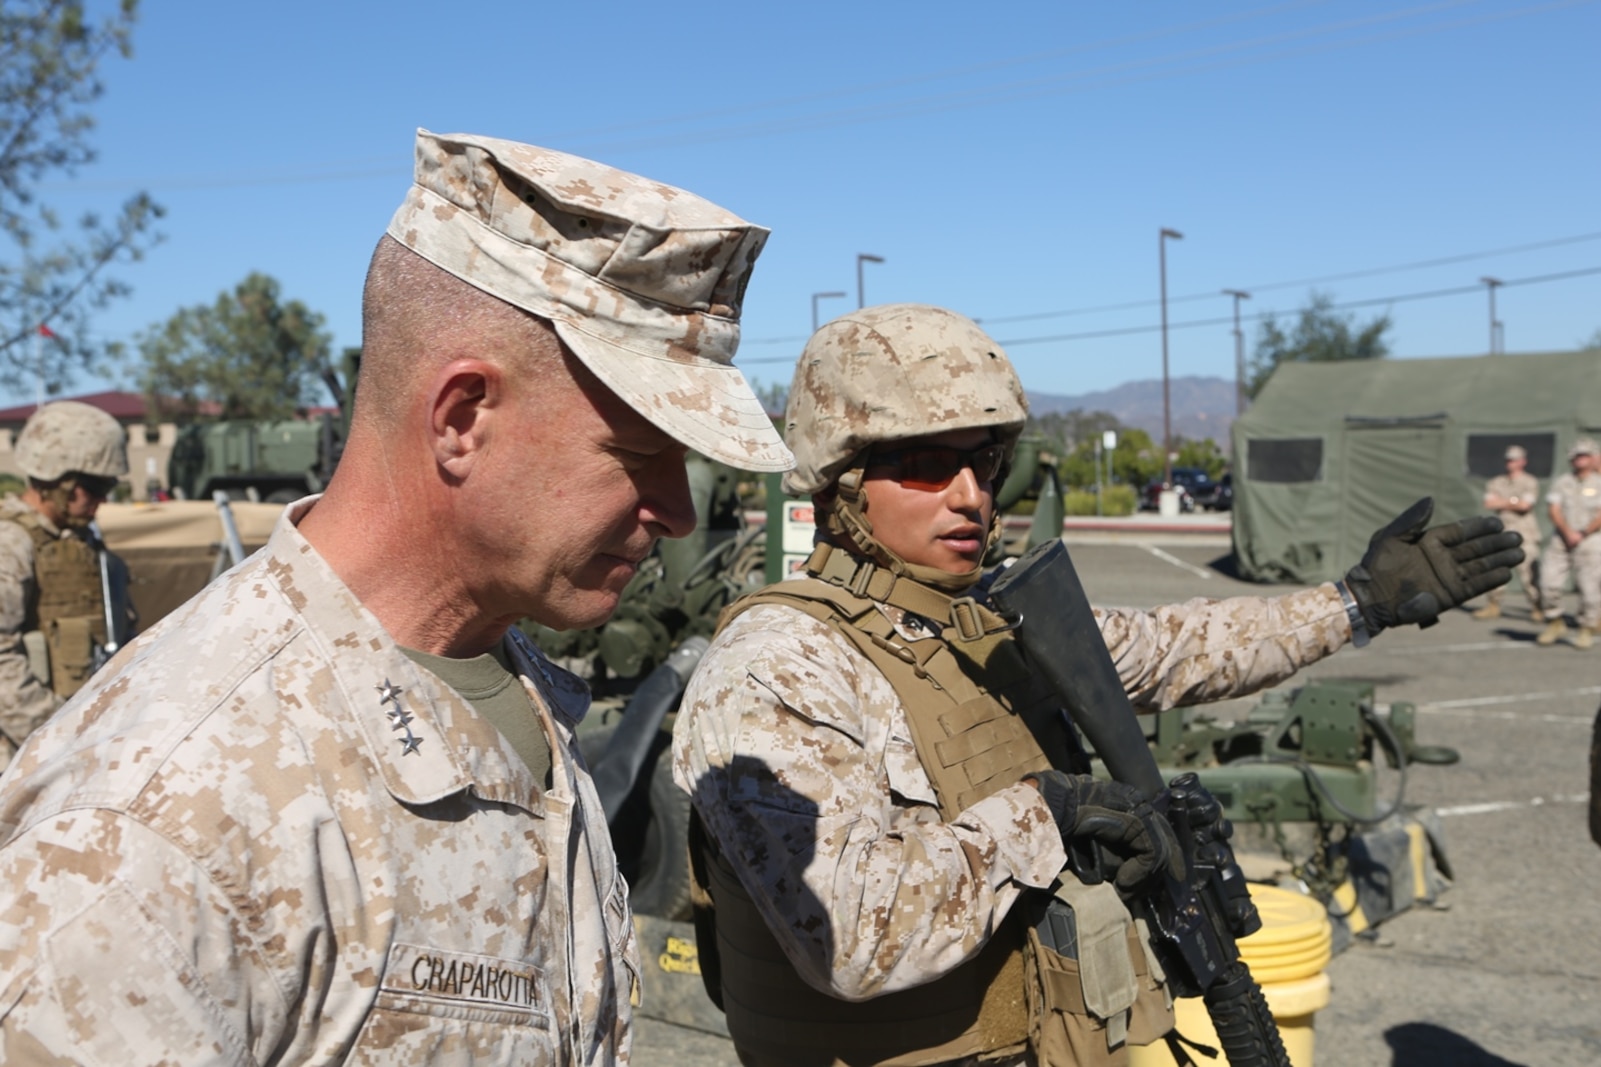 U.S. Marine Corps Sgt. Oscar Tapia demonstrates the capabilities of an amphibious assault fueling station to Lt. Gen. Lewis Craparotta, the commanding general of the I Marine Expeditionary Force, aboard Camp Pendleton, Calif., Oct. 19, 2016. Craparotta visited the 1st MLG to see the most up-to-date capabilities the logistics command has to offer I MEF. Tapia is a combat engineer with 7th Engineer Support Battalion, 1st Marine Logistics Group. (U.S. Marine Corps photo by Lance Cpl. Joseph Sorci)